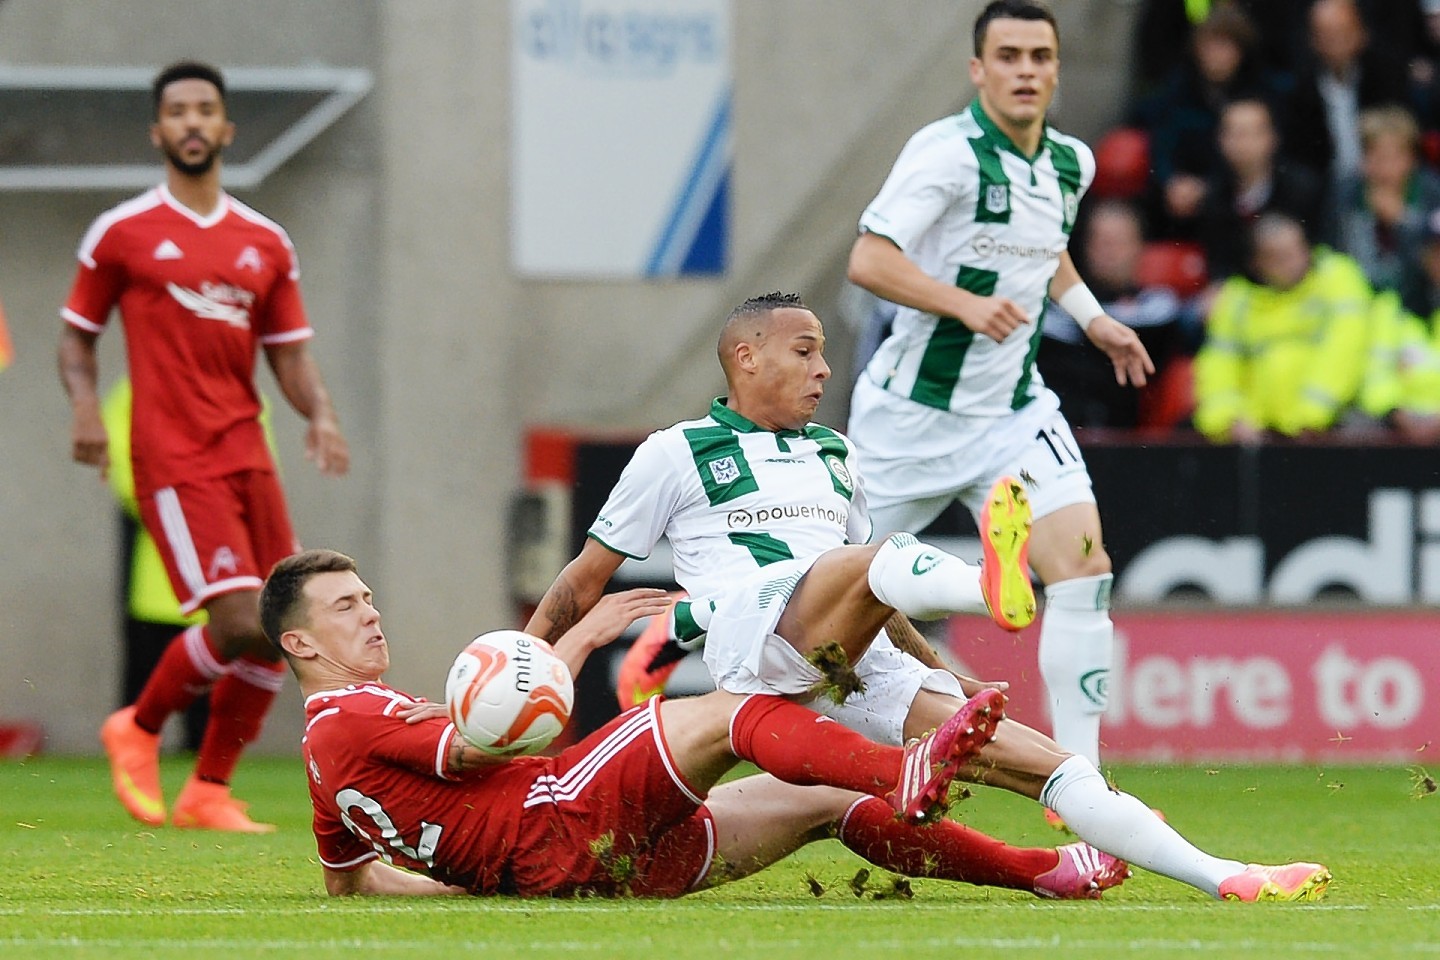 Pictures live from Aberdeen's game against Groningen